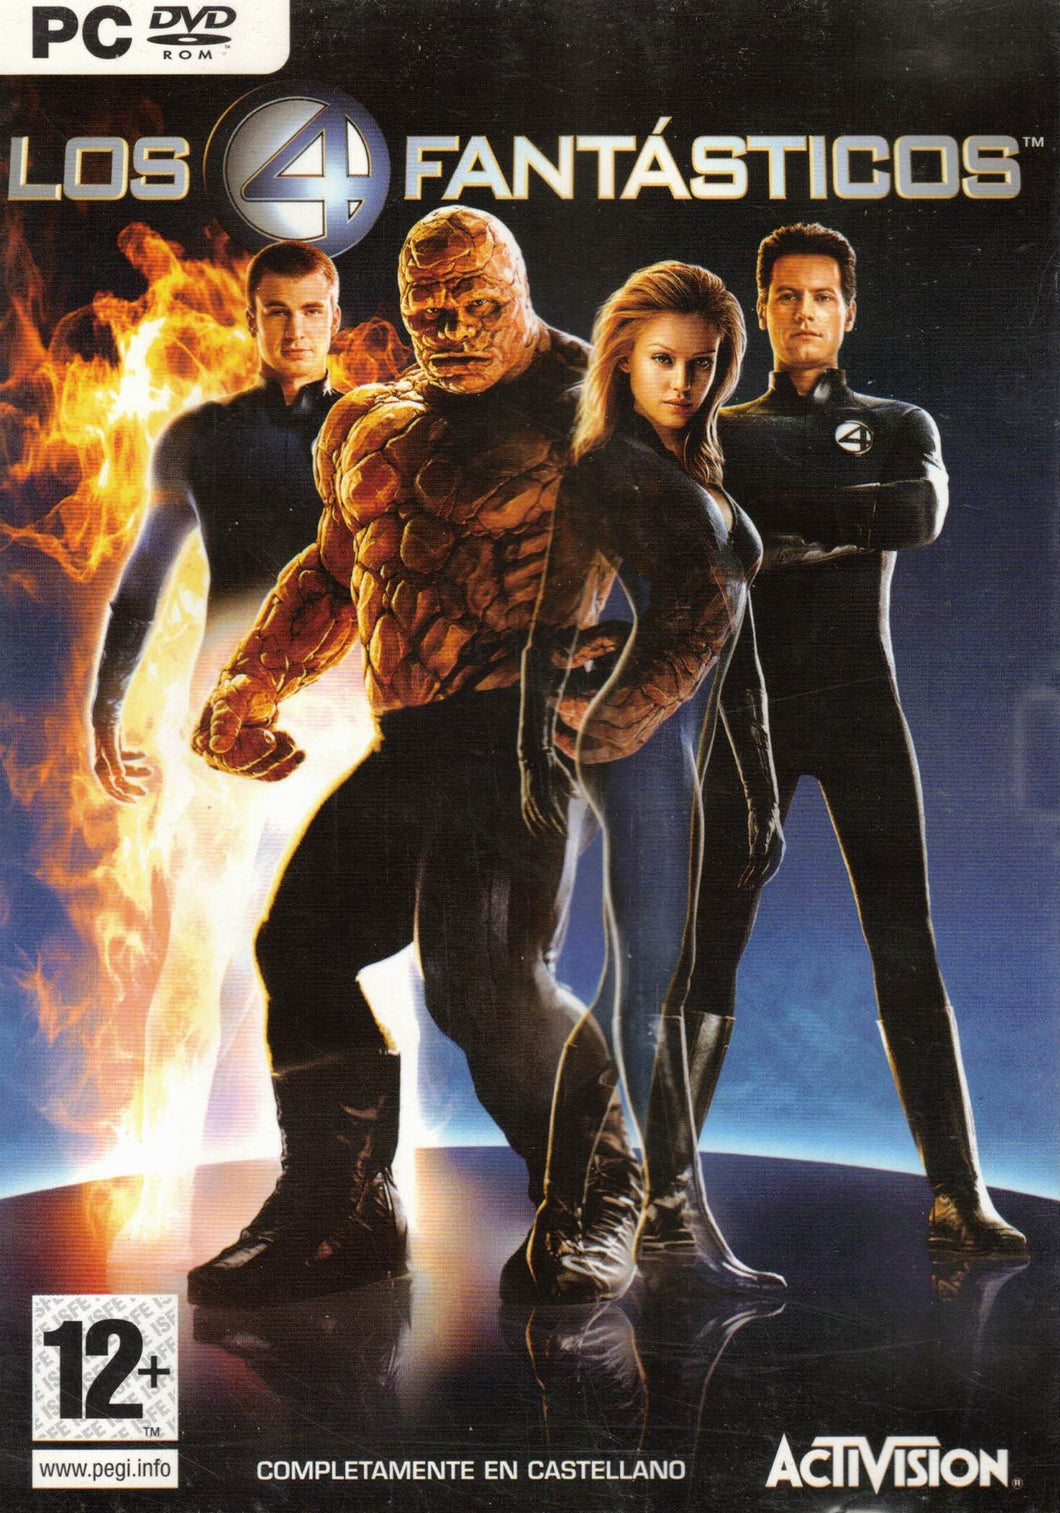 Fantastic Four (PC-DVD-ROM) C-202 (good second hand)